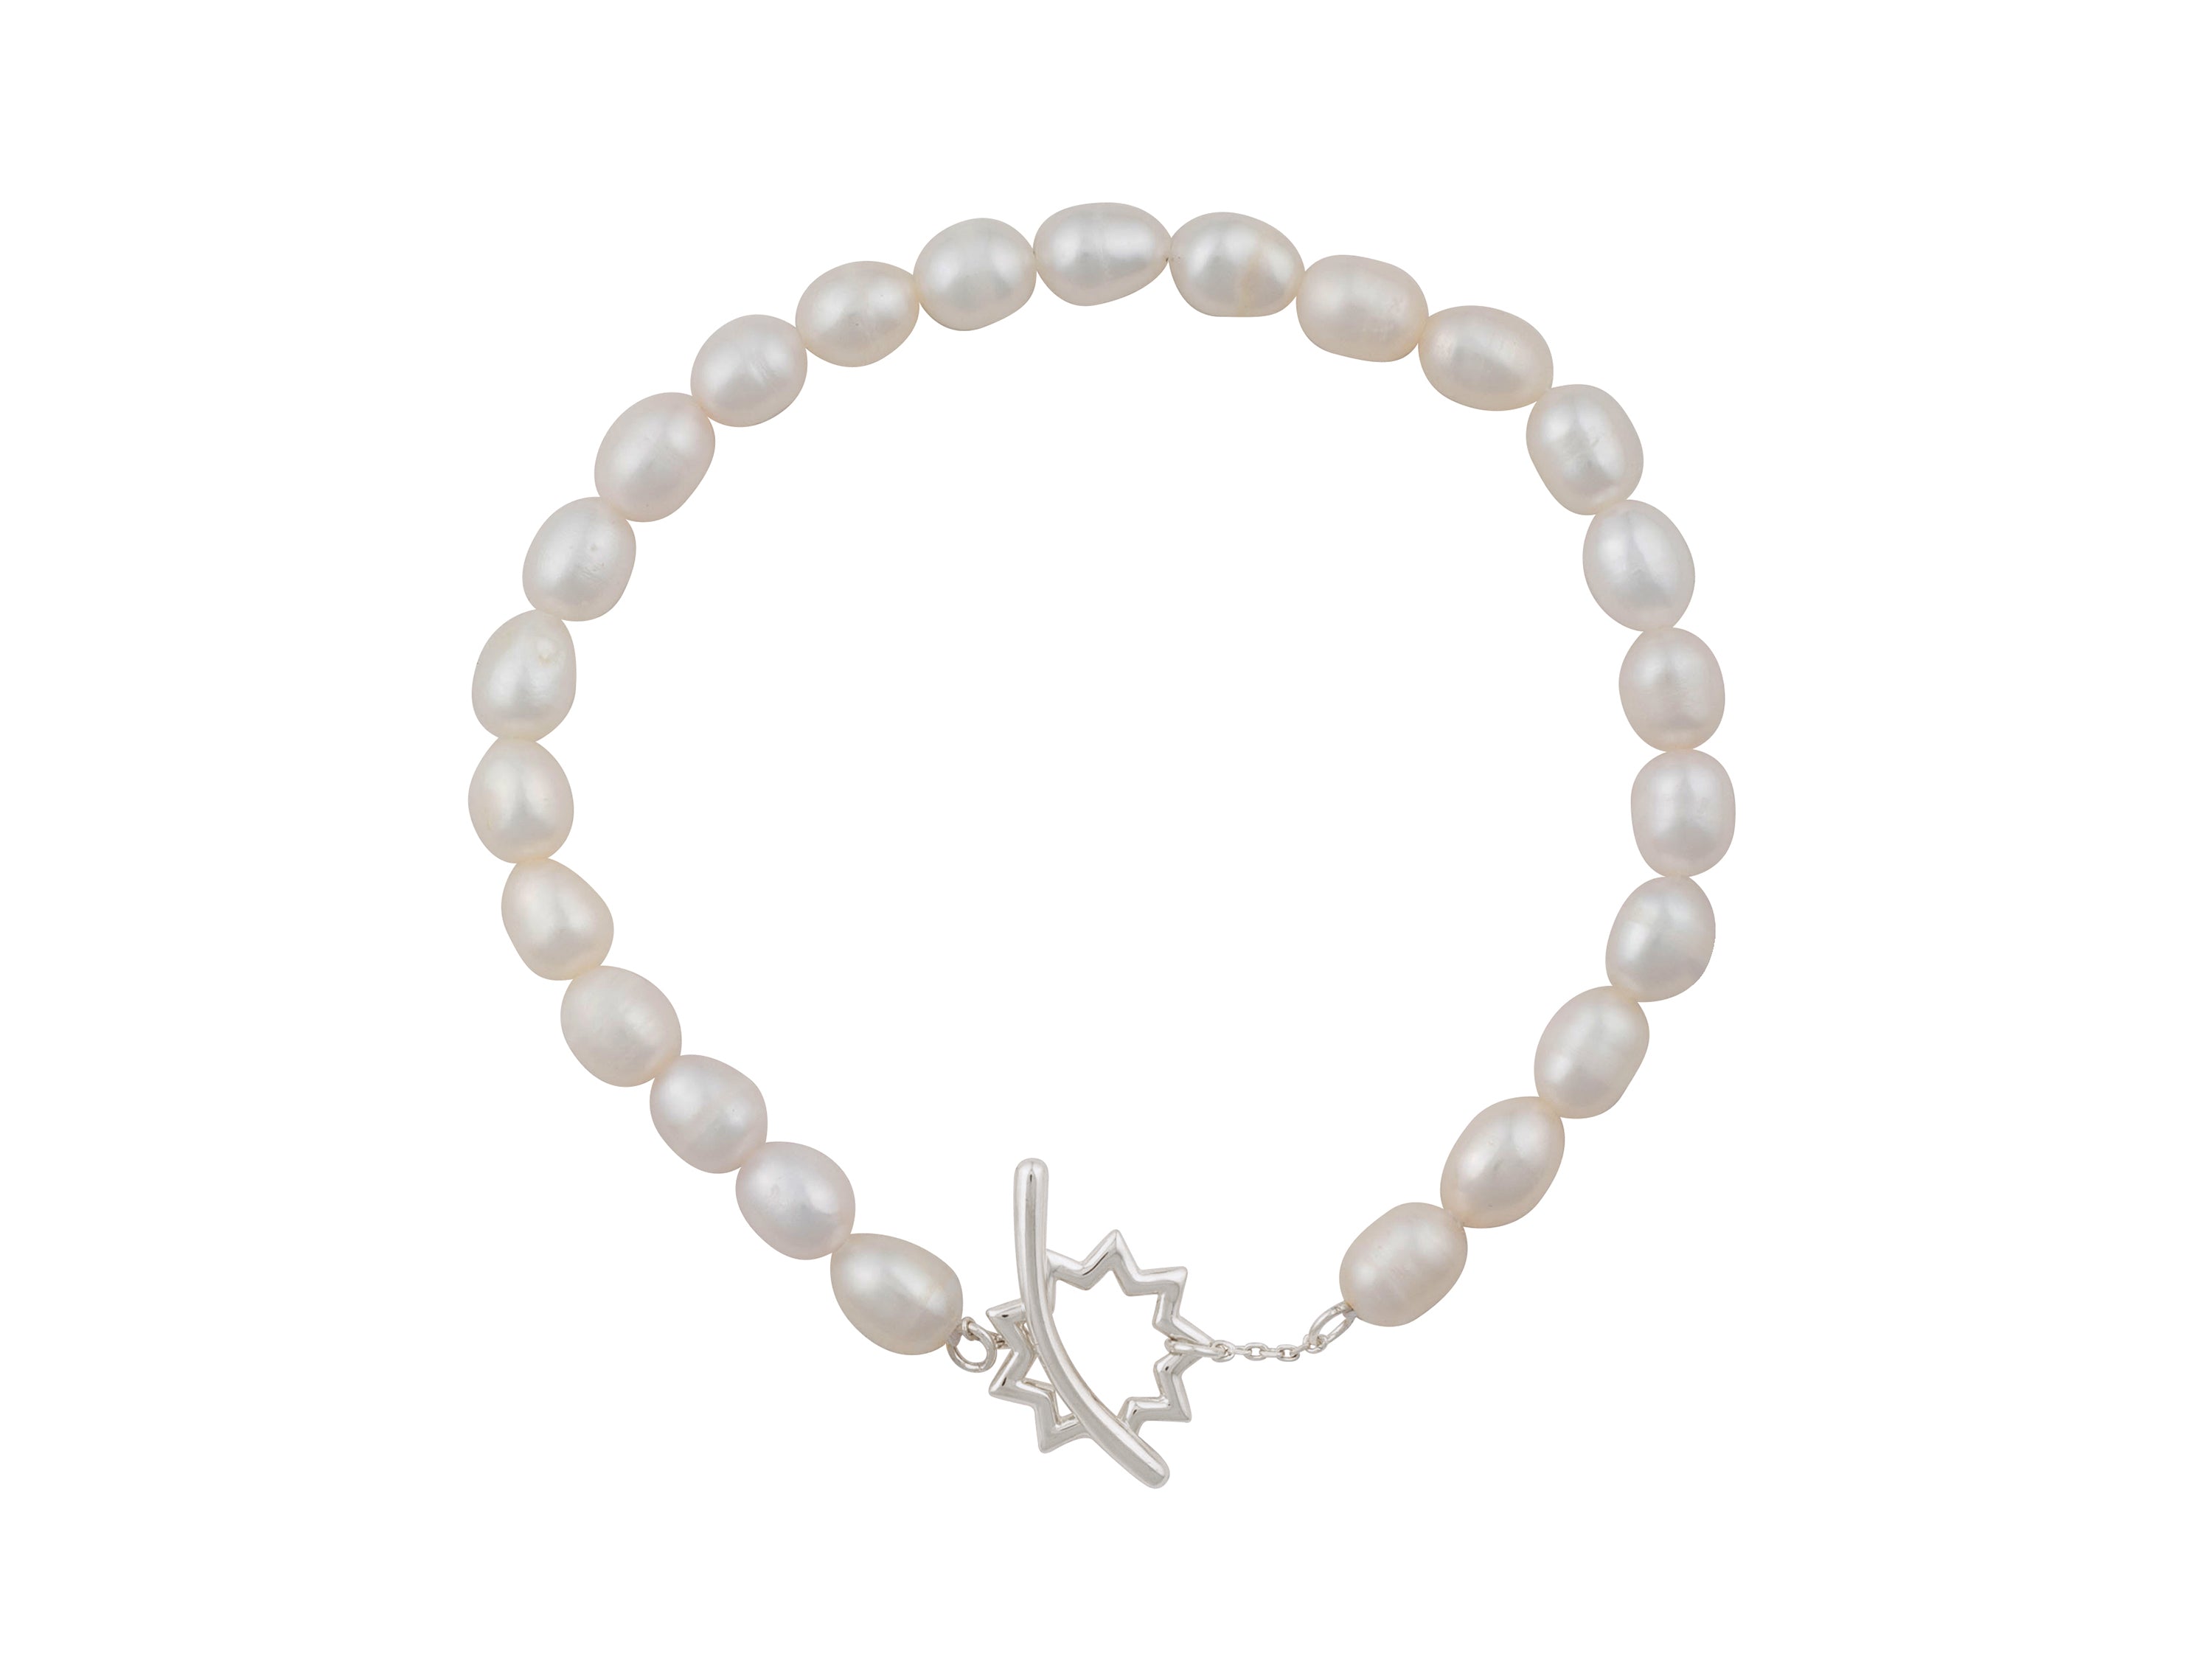 Bahai nine star outline silver toggle clasp on oval freshwater pearl bracelet